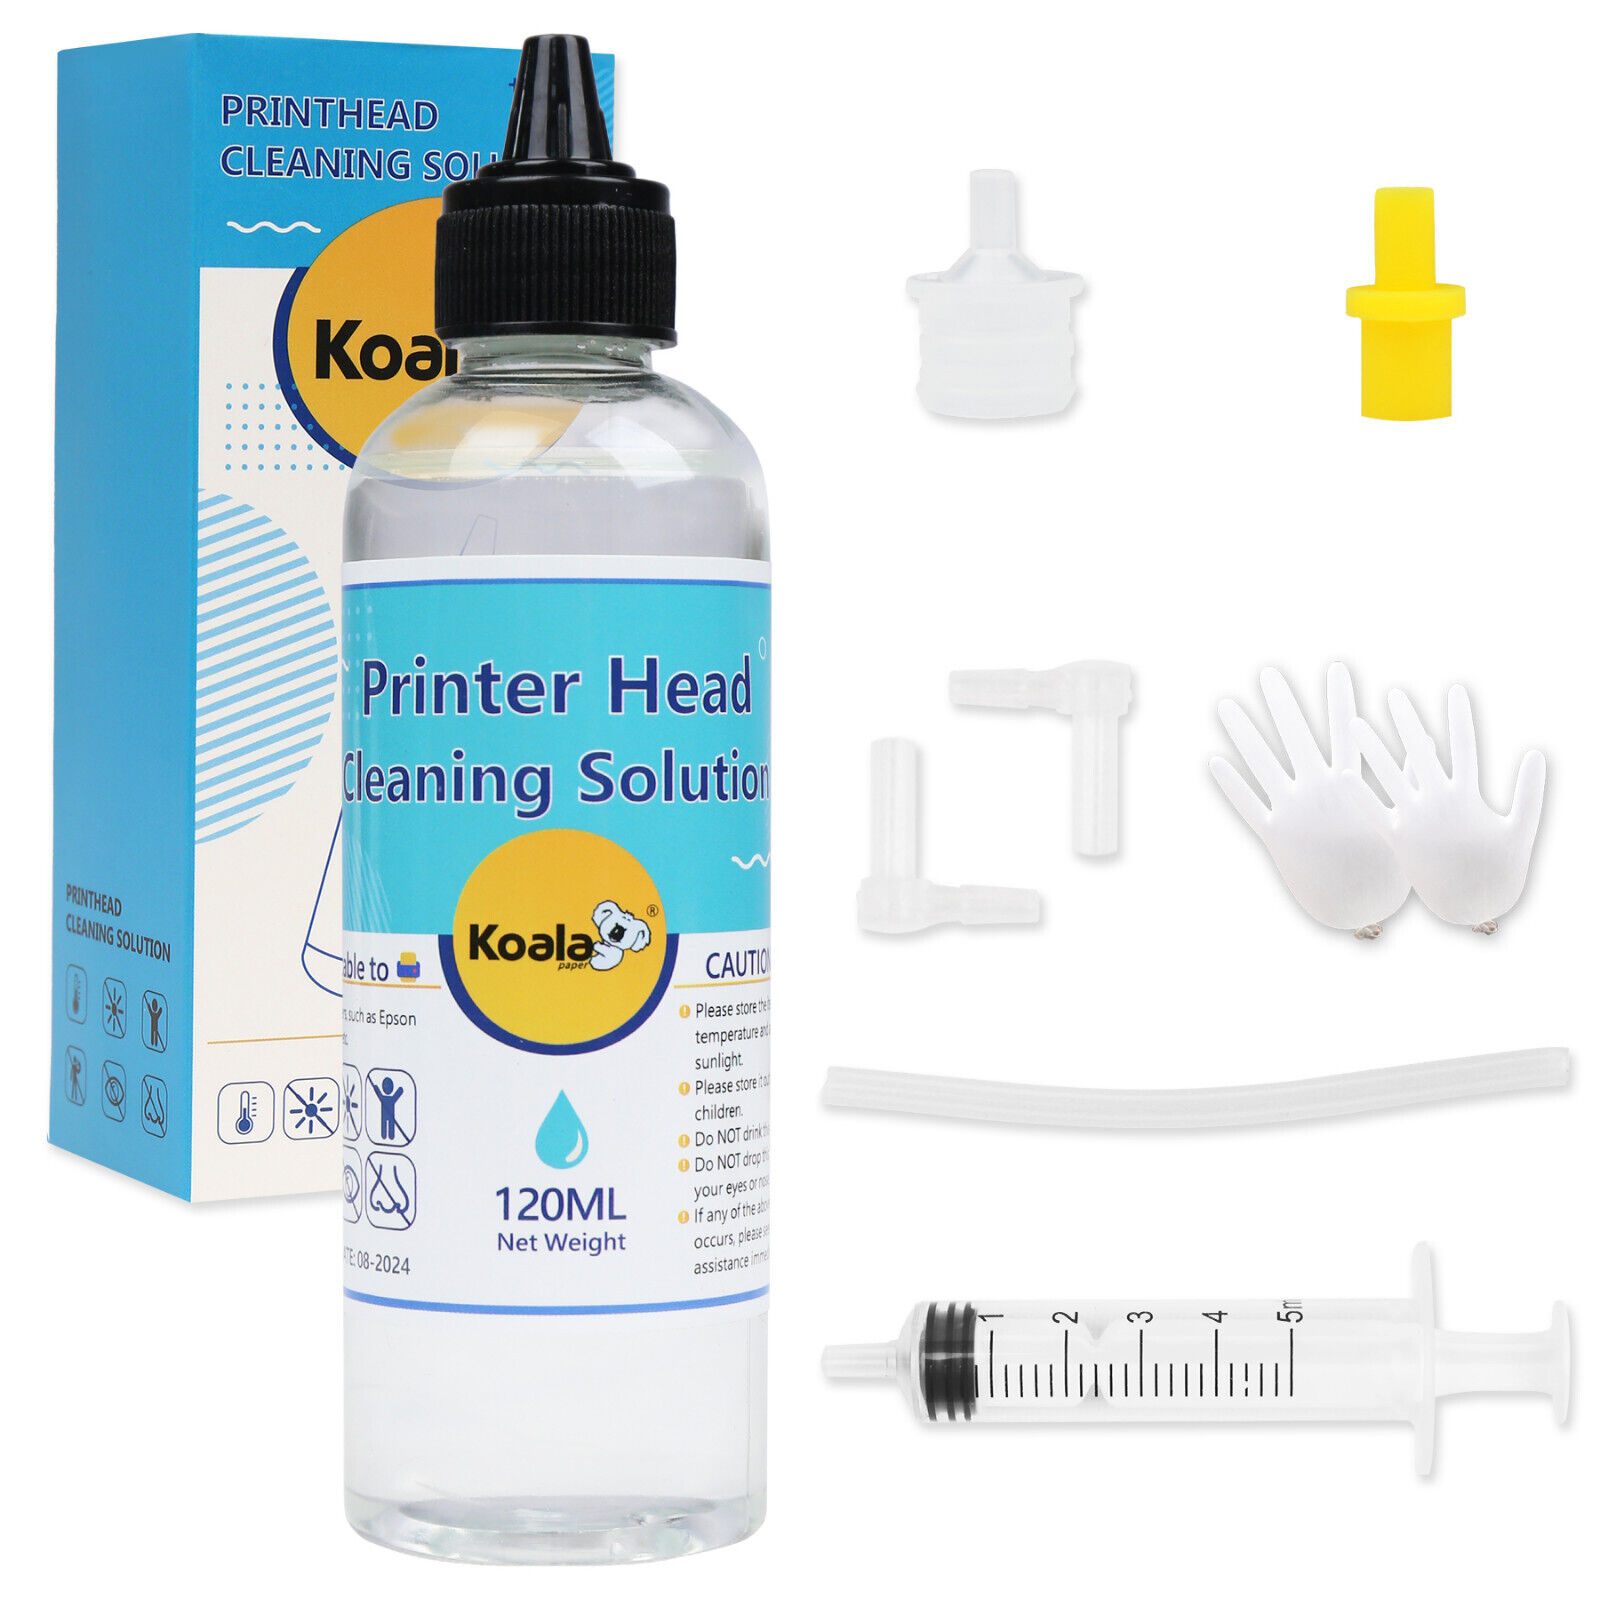 Koala Print Head Cleaner Kit 120ML for Epson HP Canon Brother Cleaning Solution